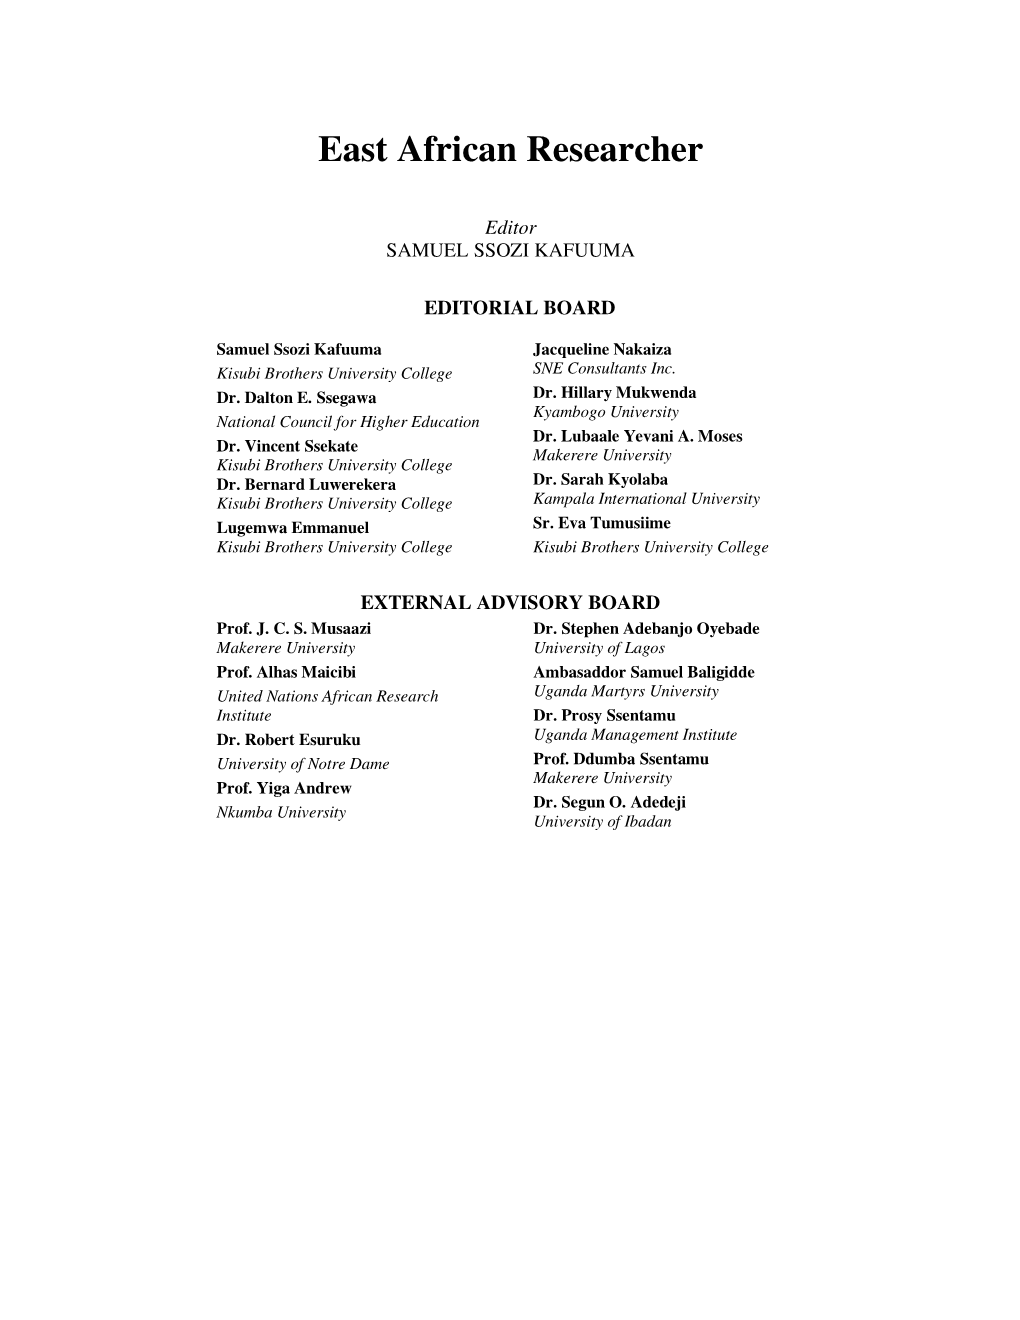 EAST AFRICAN RESEARCHER Volume 1-1 Feb 2012